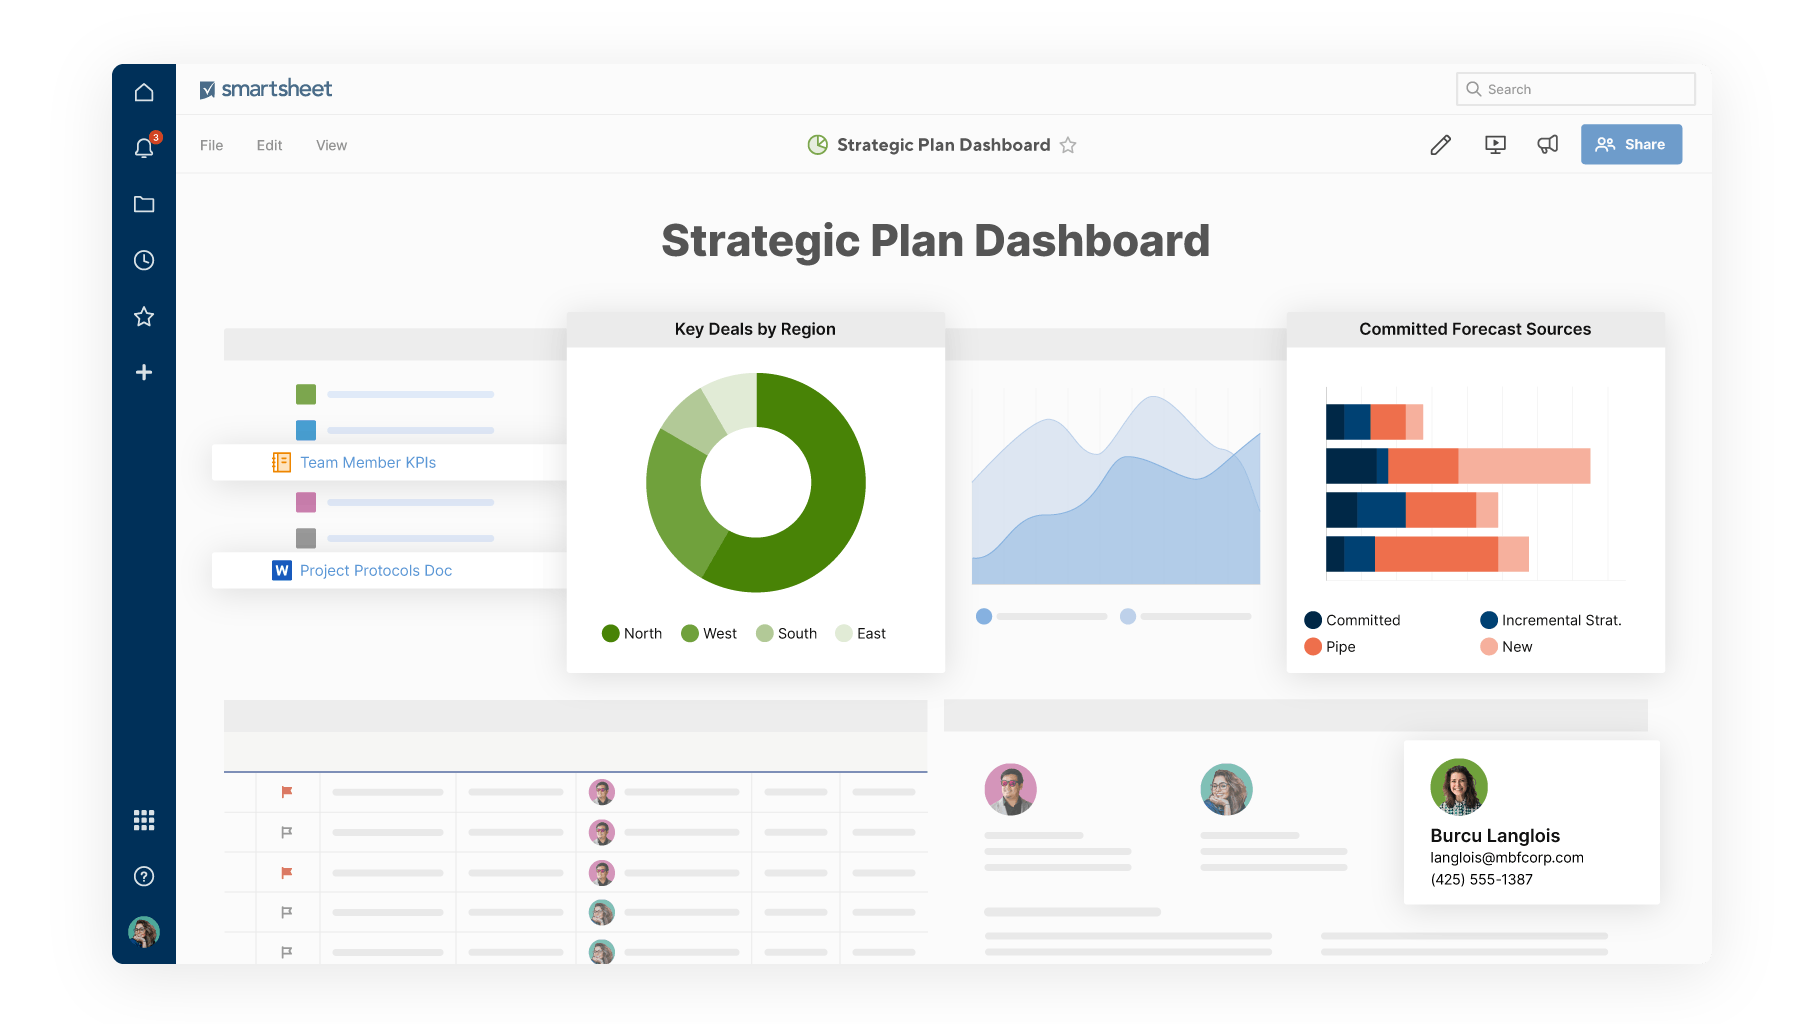 <p style="text-align: center;"><span style="font-weight: 400;">Project planning dashboard in </span><a href="https://www.capterra.com/p/79104/Smartsheet"><span style="font-weight: 400;">Smartsheet</span></a><span style="font-weight: 400;"> (</span><a href="https://www.capterra.com/p/79104/Smartsheet"><span style="font-weight: 400;">Source</span></a><span style="font-weight: 400;">)</span></p>
